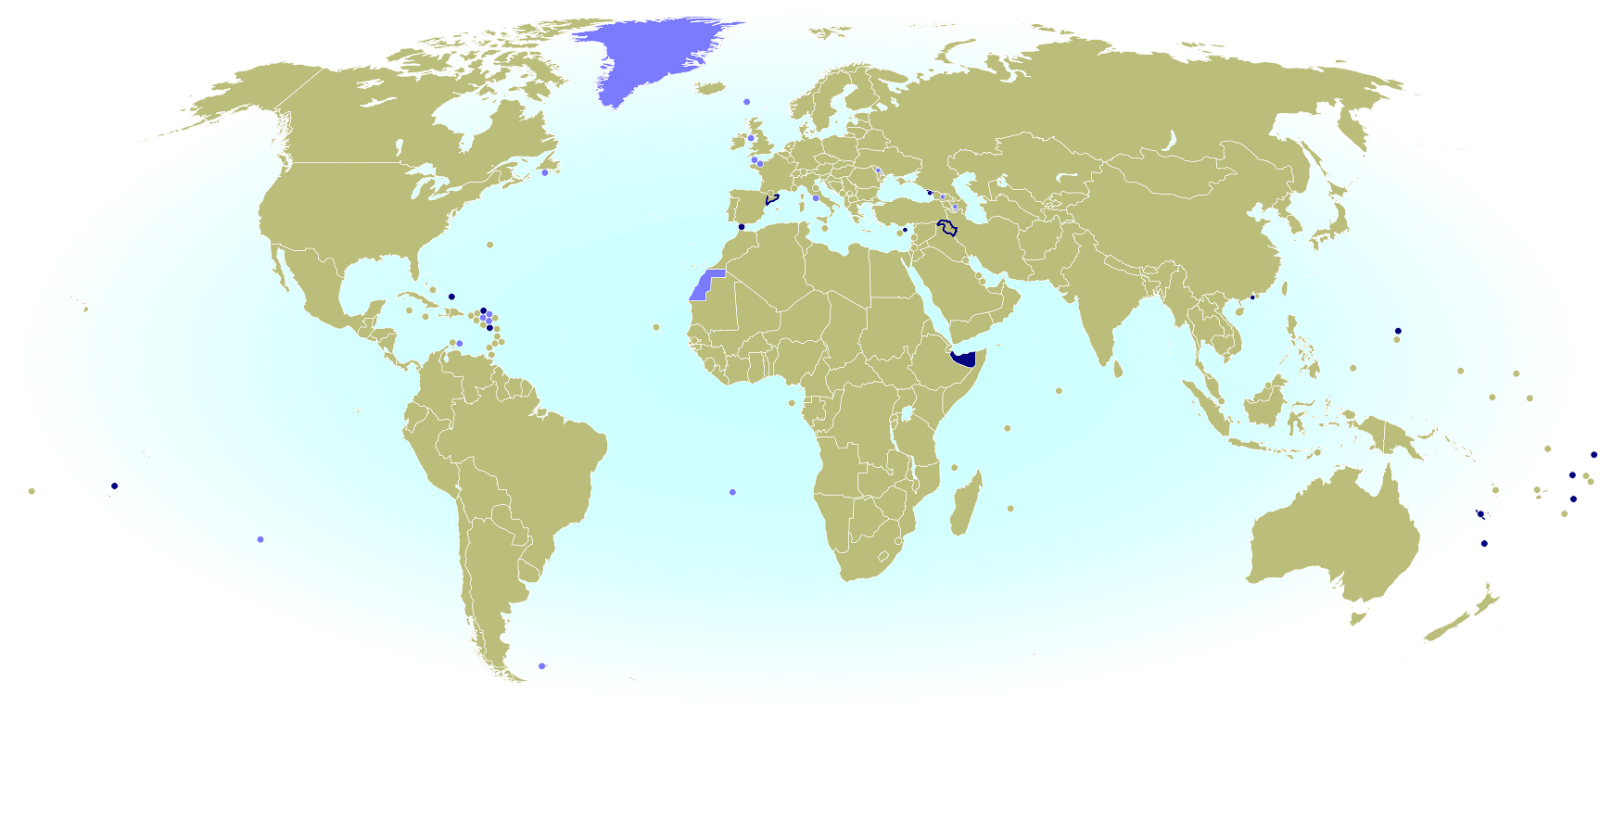 World map marking independent countries (de facto sovereign states) and dependent territories that don't have IOC-recognized National Olympic Committees, and are thus not allowed to send their own teams to the Olympics